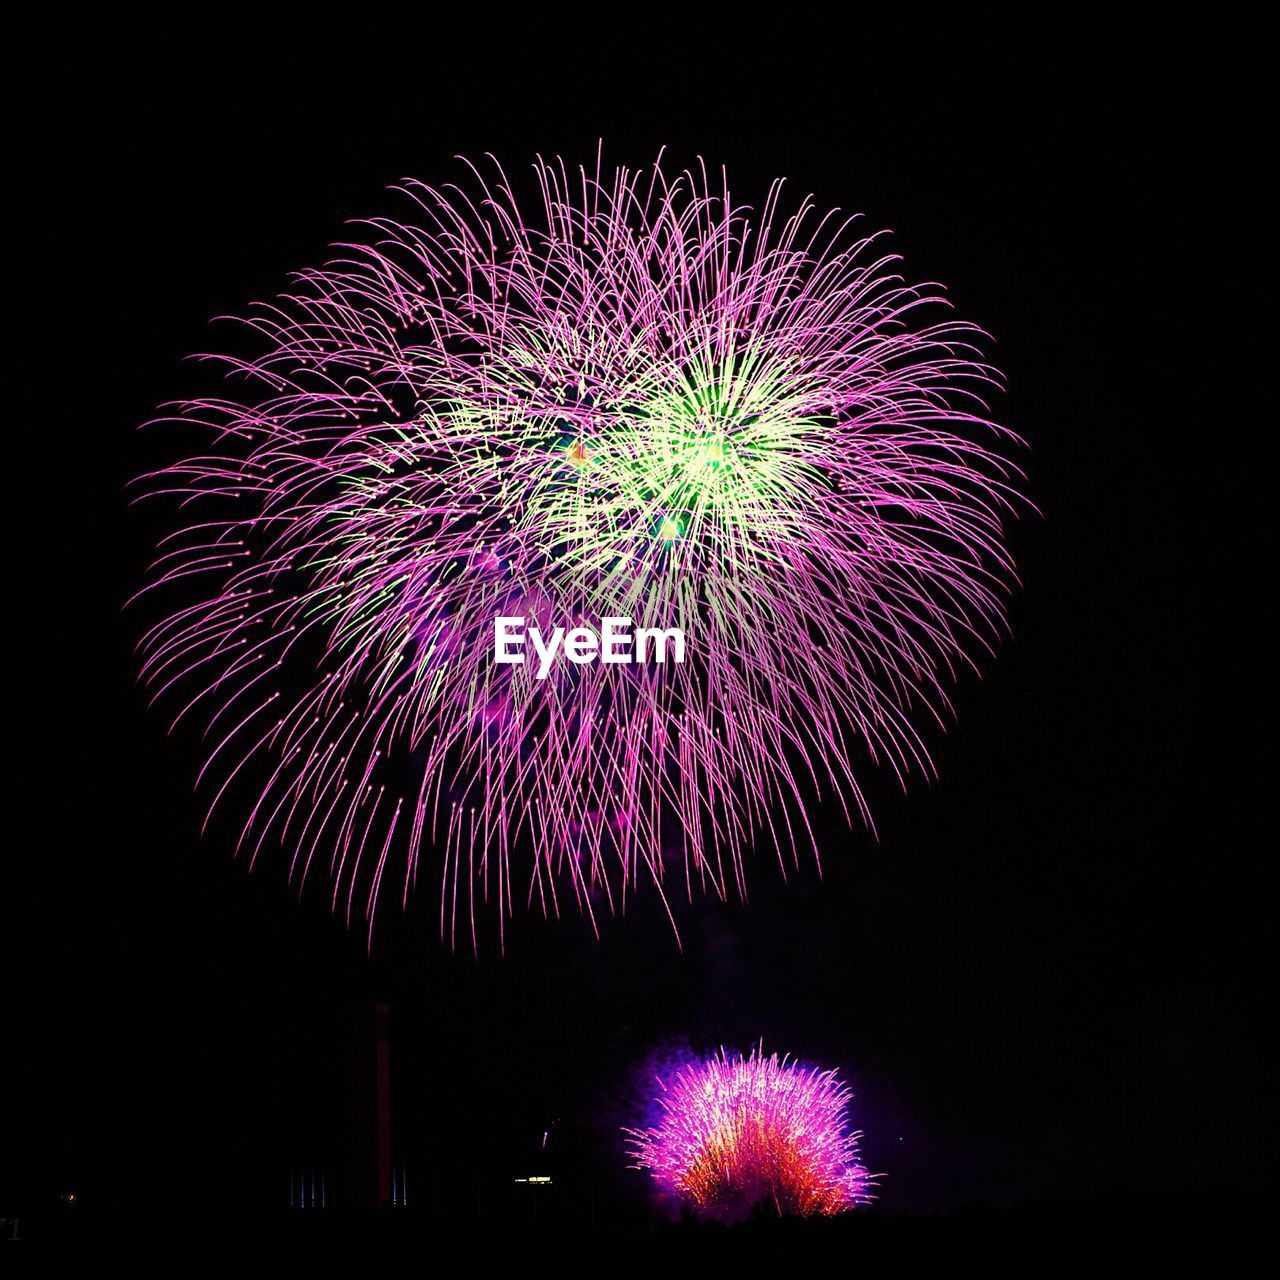 Colorful fireworks display in sky at night